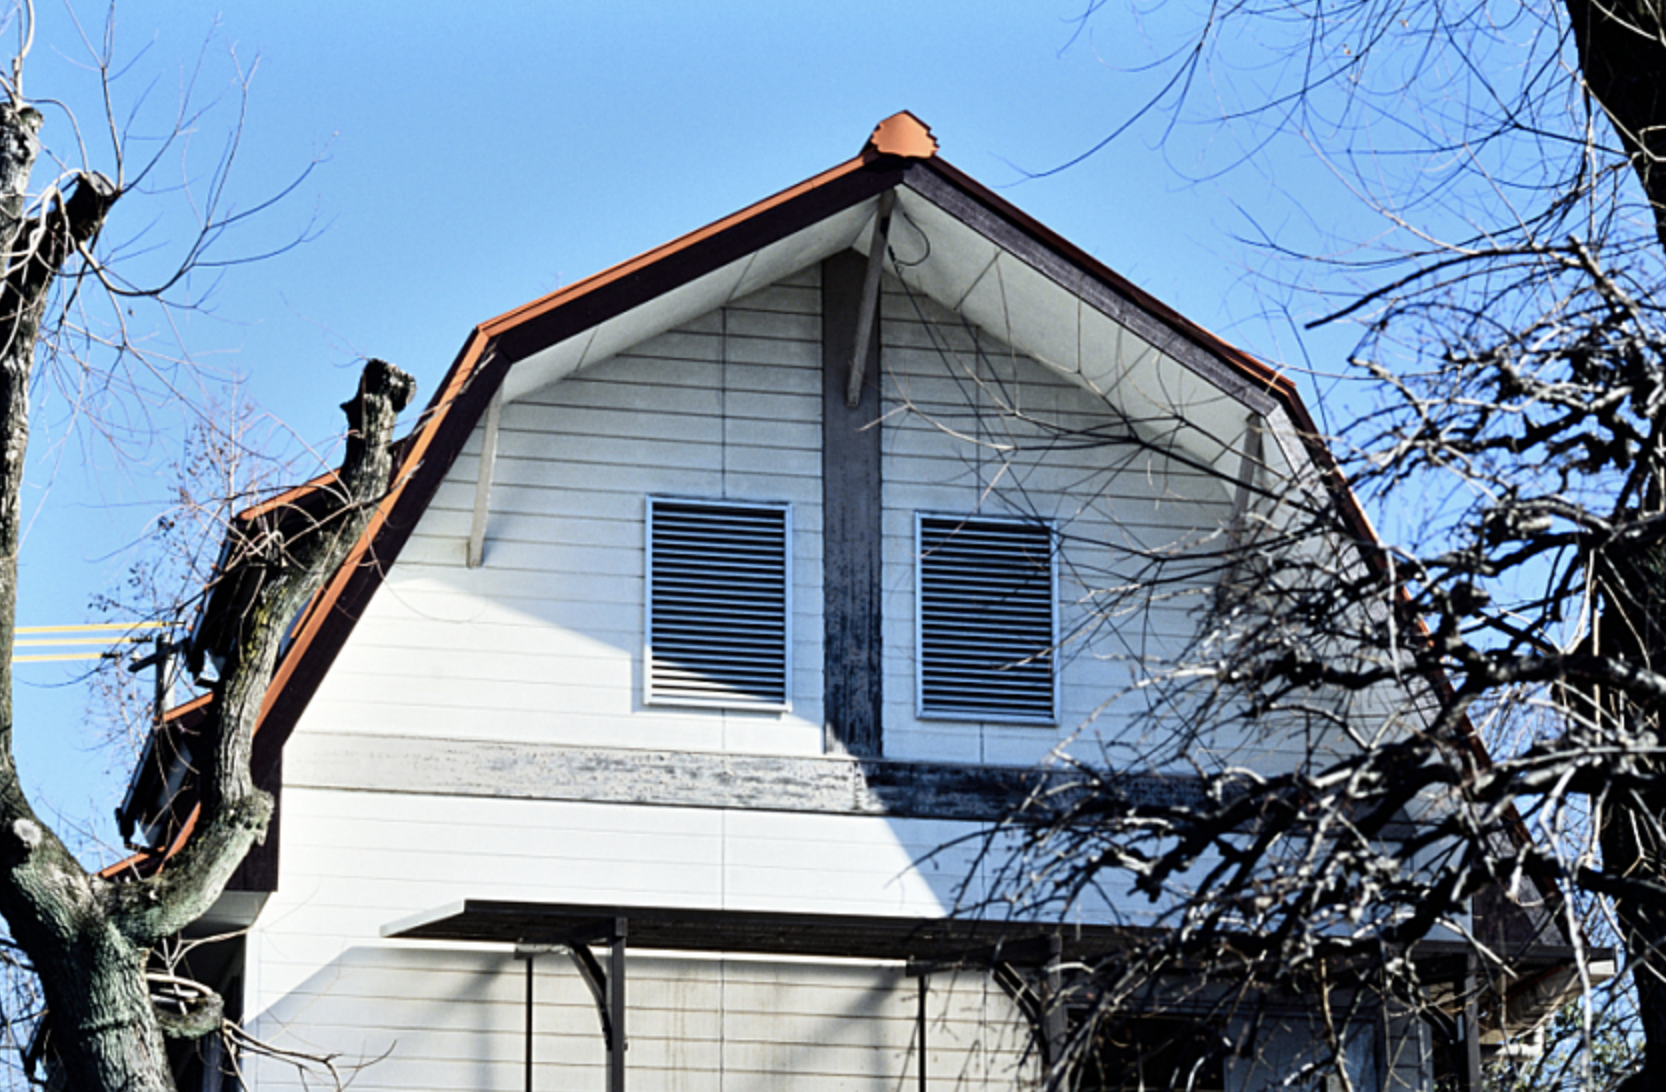 Gambrel roof with trees